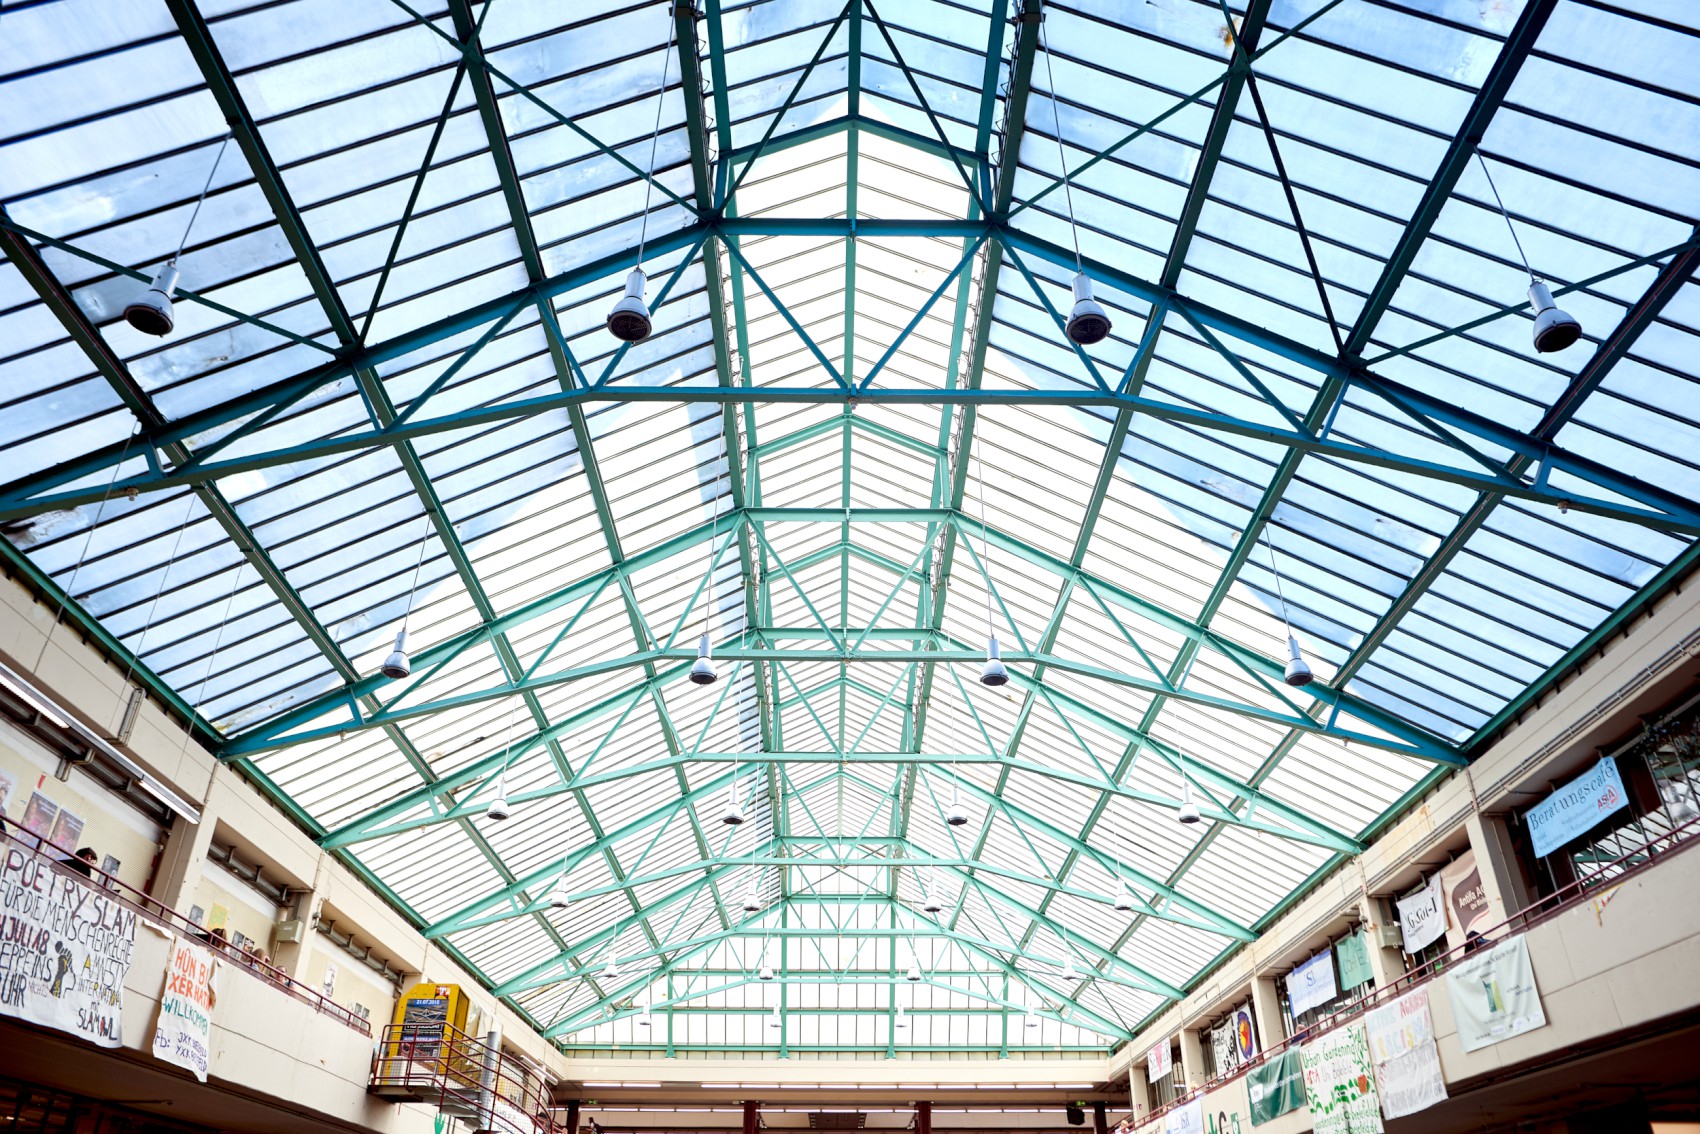 The glas roof of the main hall in the university's main building